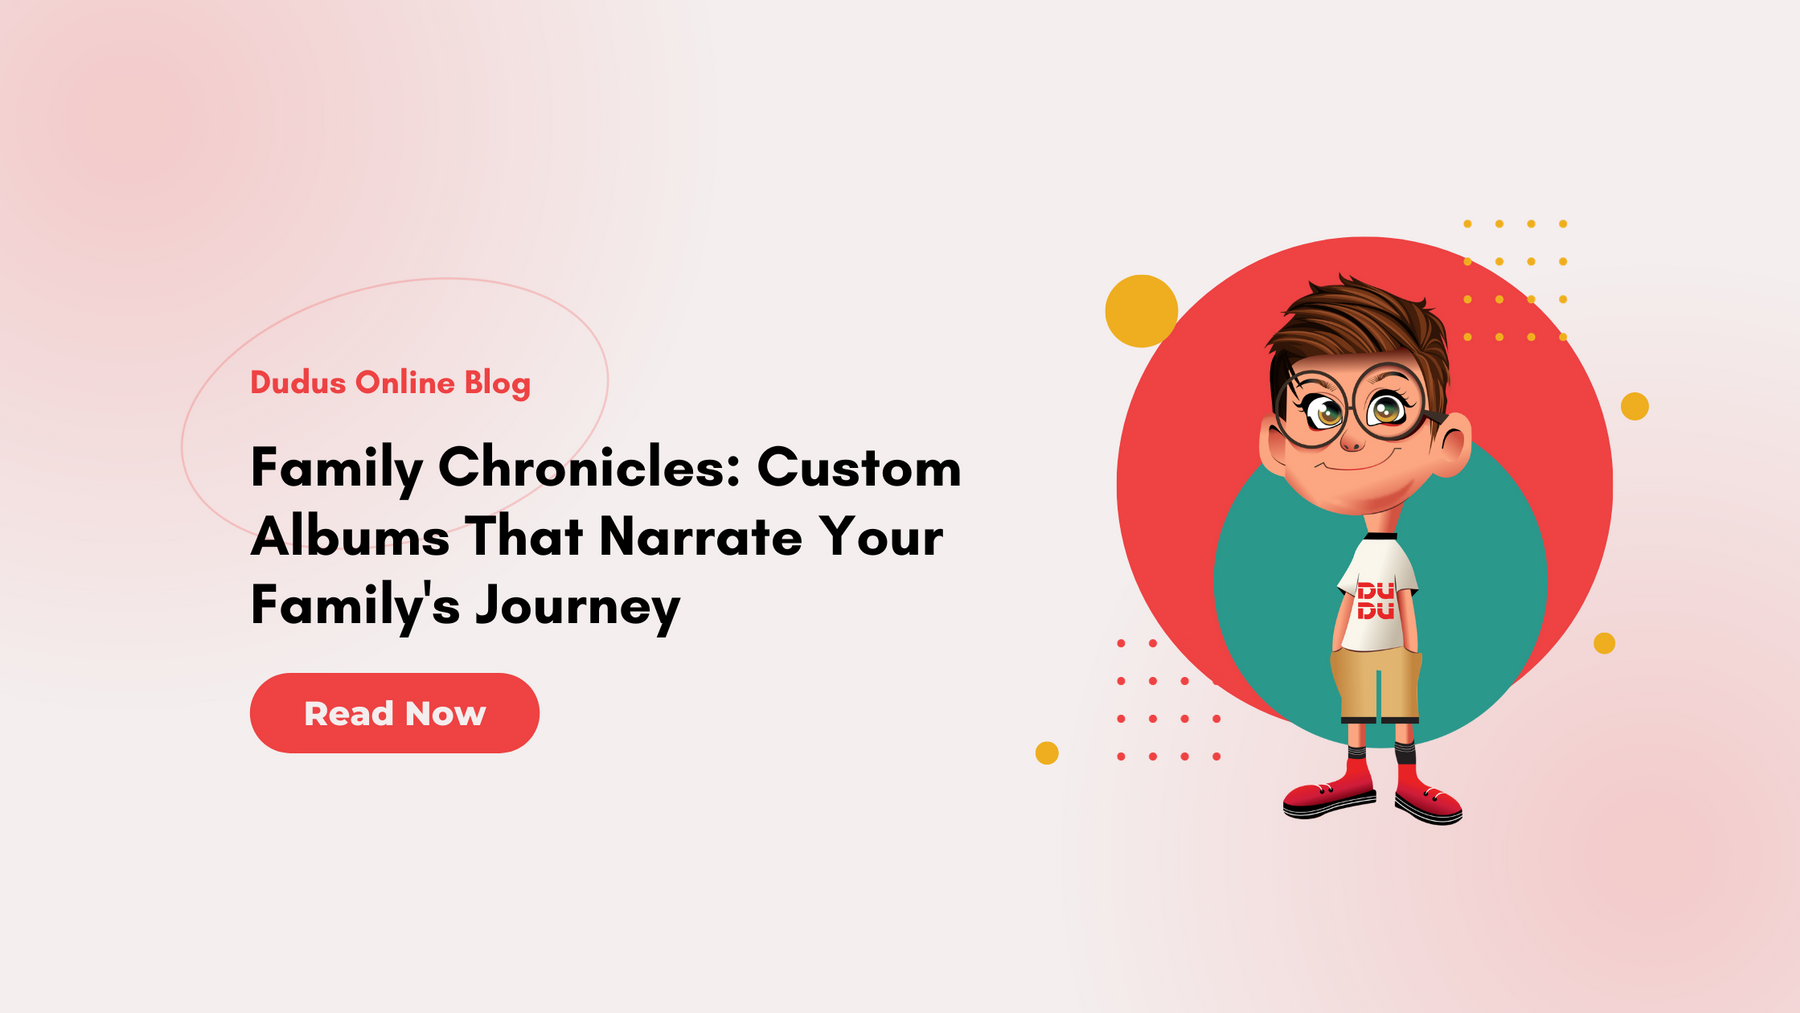 Family Chronicles: Custom Albums That Narrate Your Family's Journey